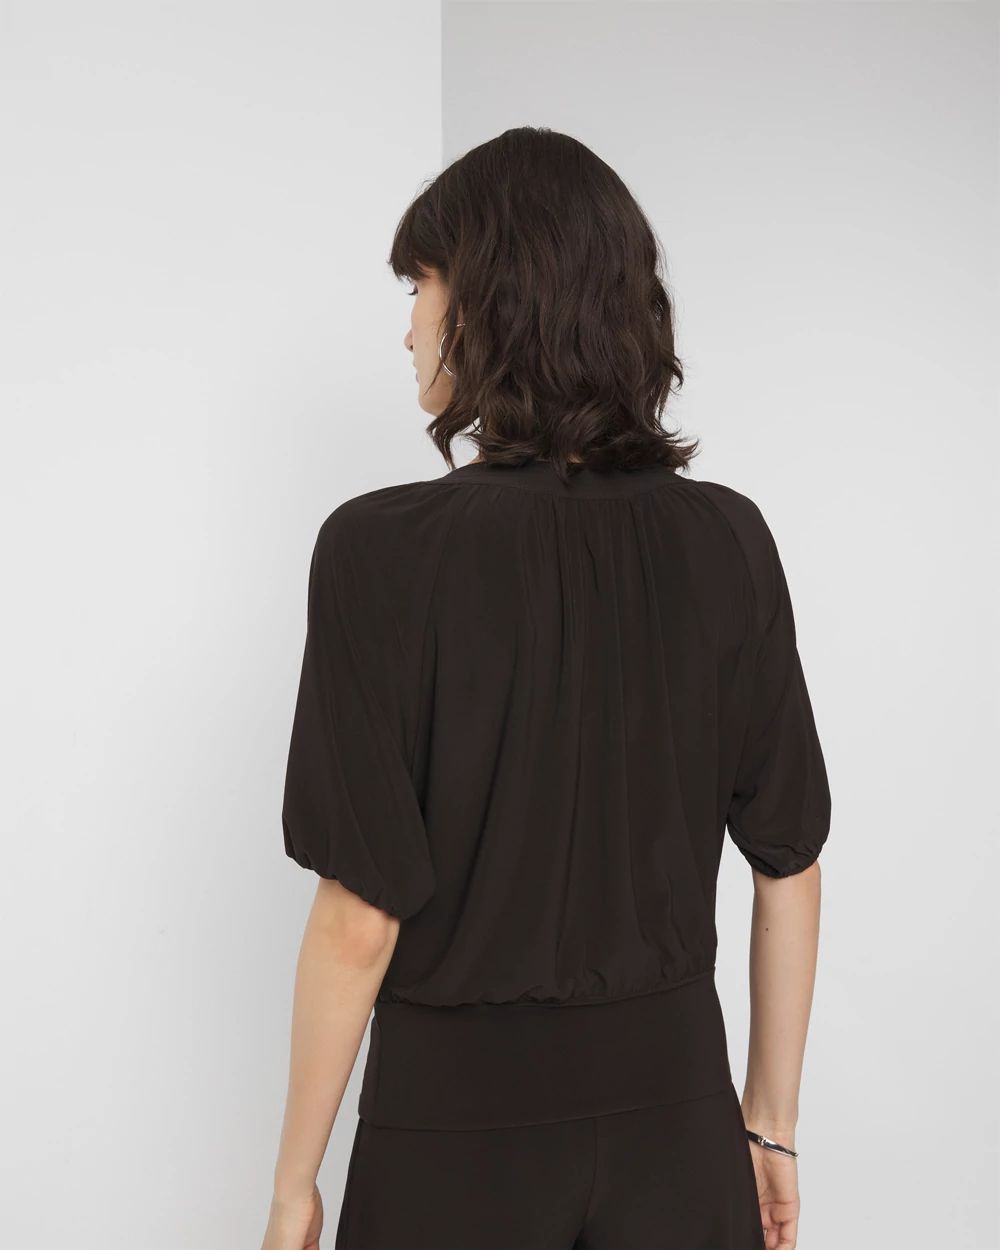 Matte Jersey 3/4 Sleeve Notch Neck Top click to view larger image.